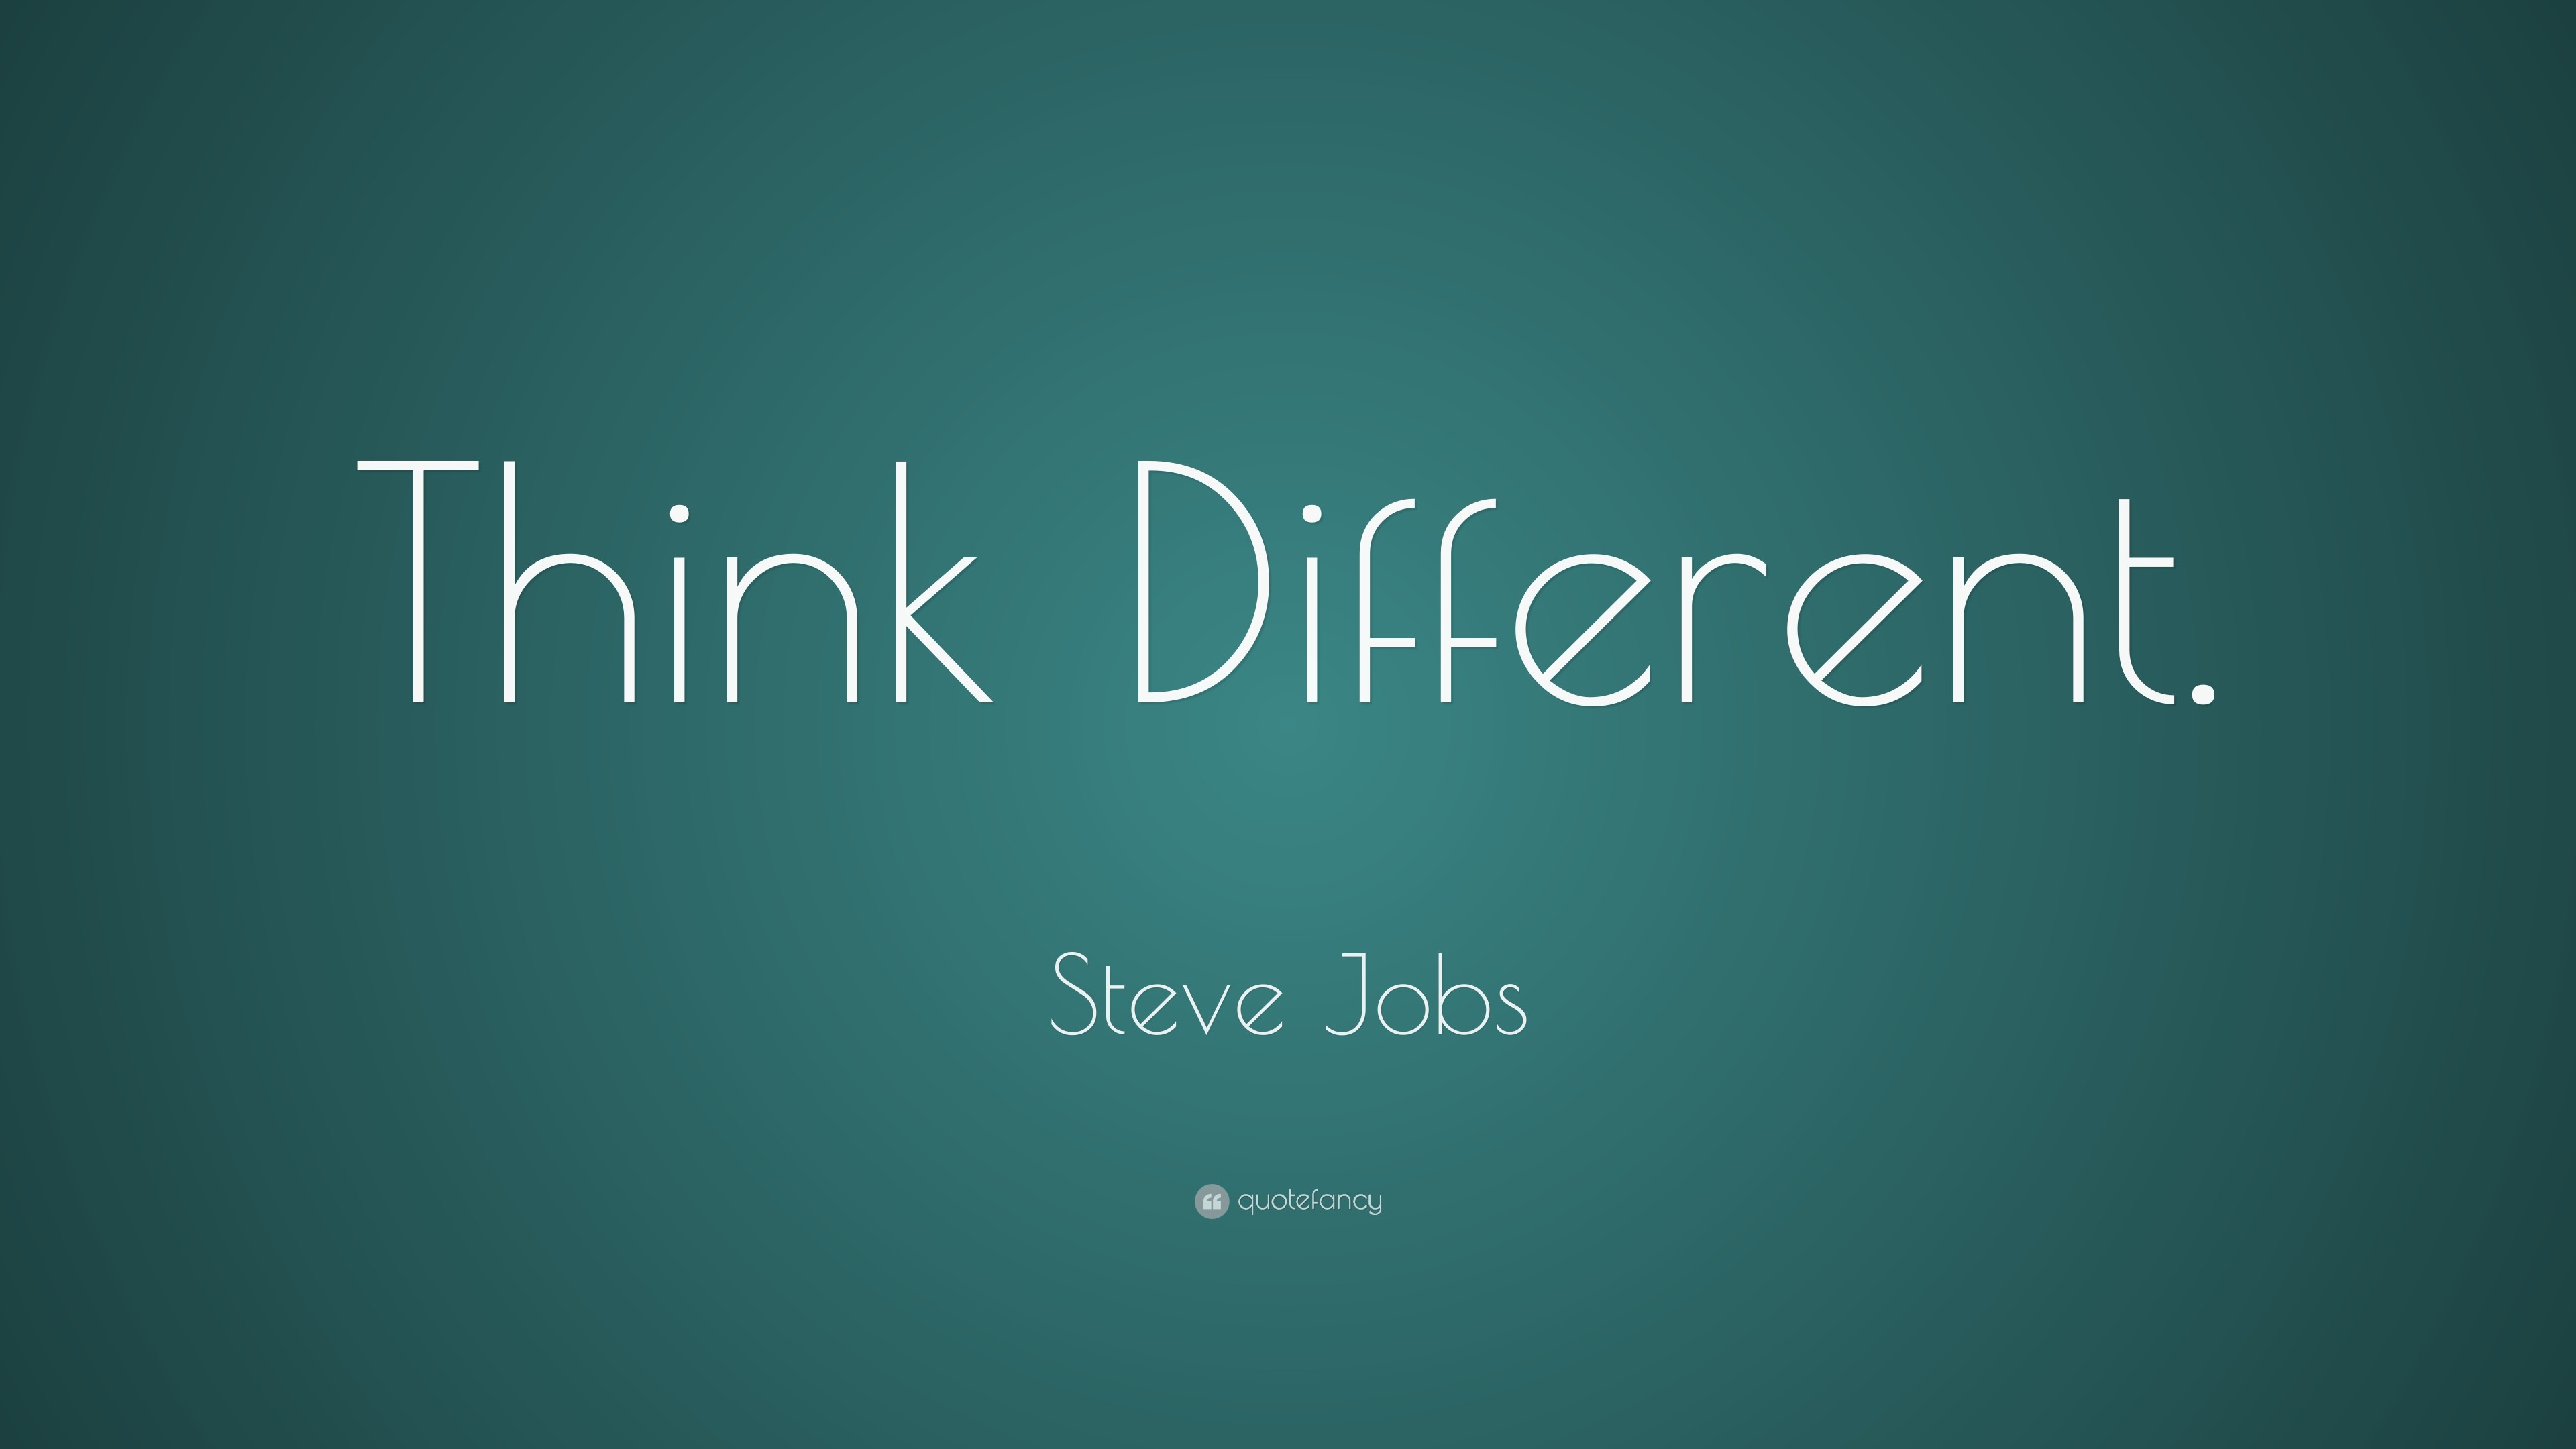 3840x2160 Steve Jobs Quote: “Think Different.”